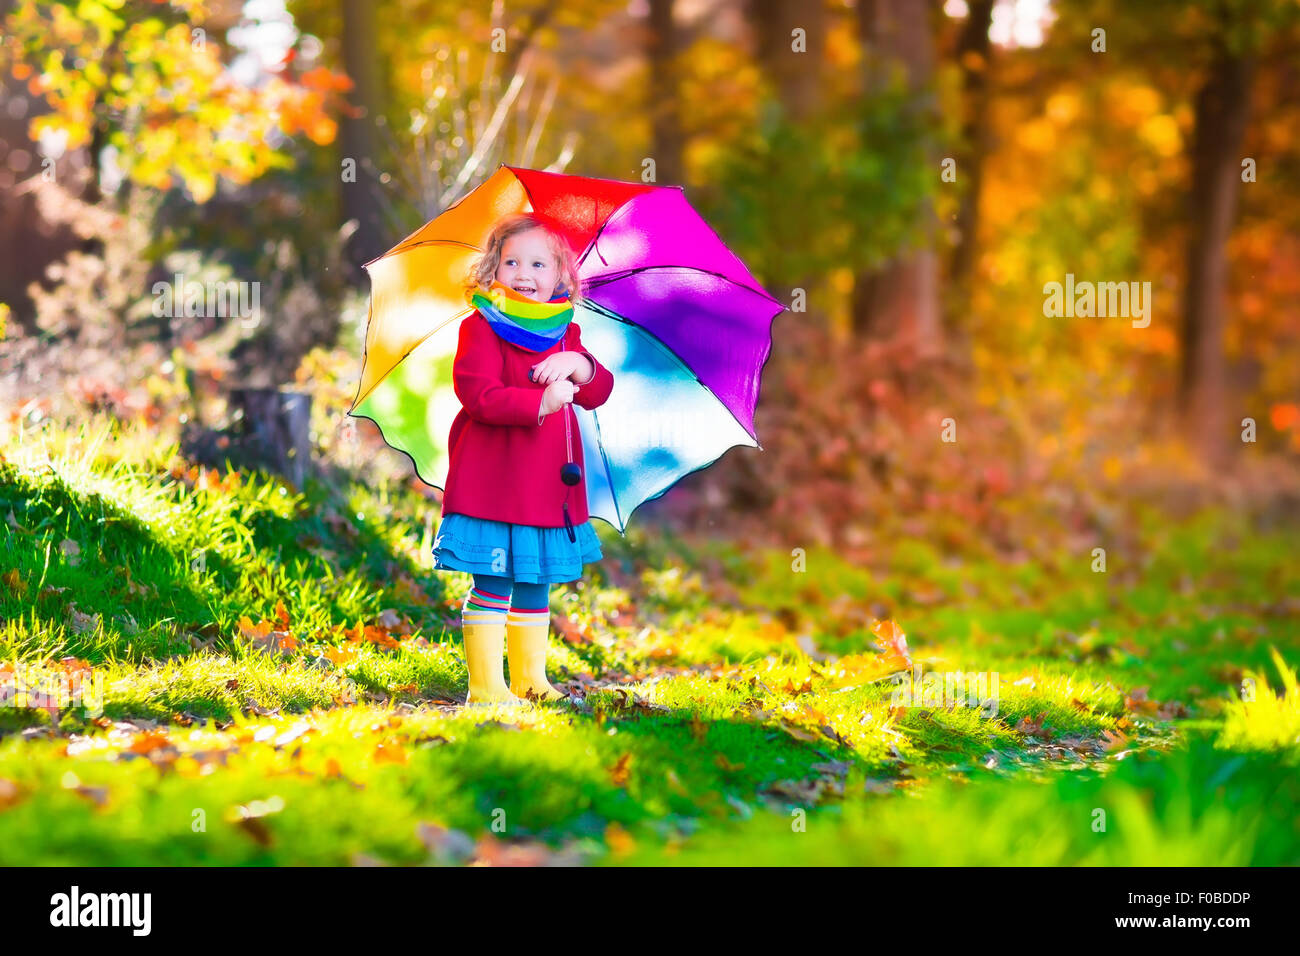 Little girl playing in the rain in autumn park. Child holding umbrella walking in the forest on a sunny fall day Stock Photo